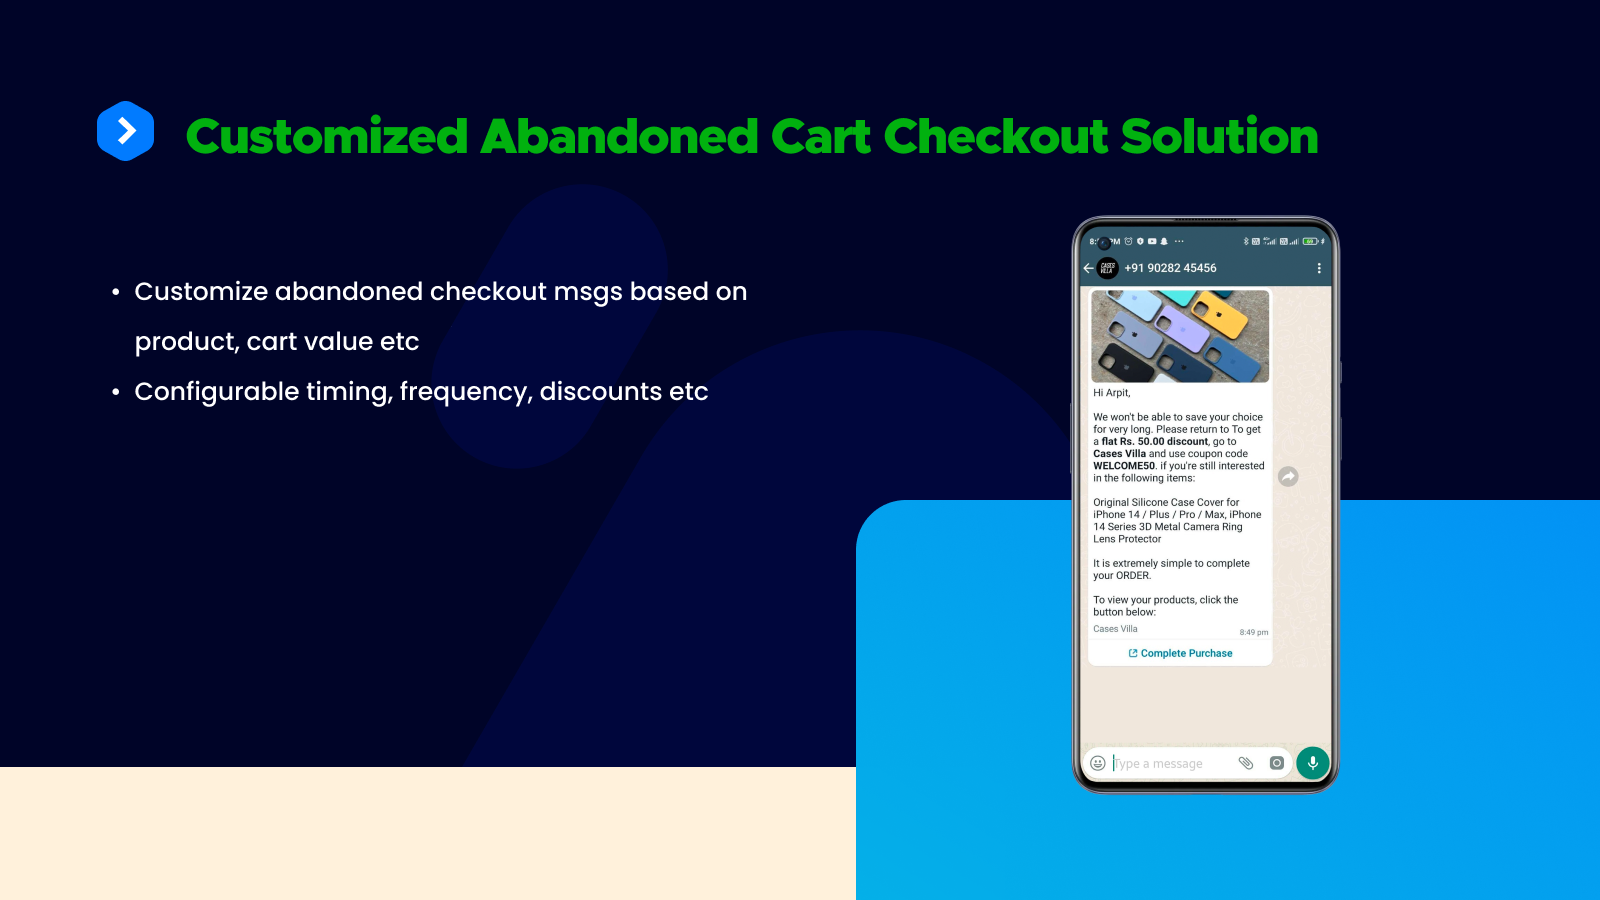 Customized Abandoned Cart Checkout Solution